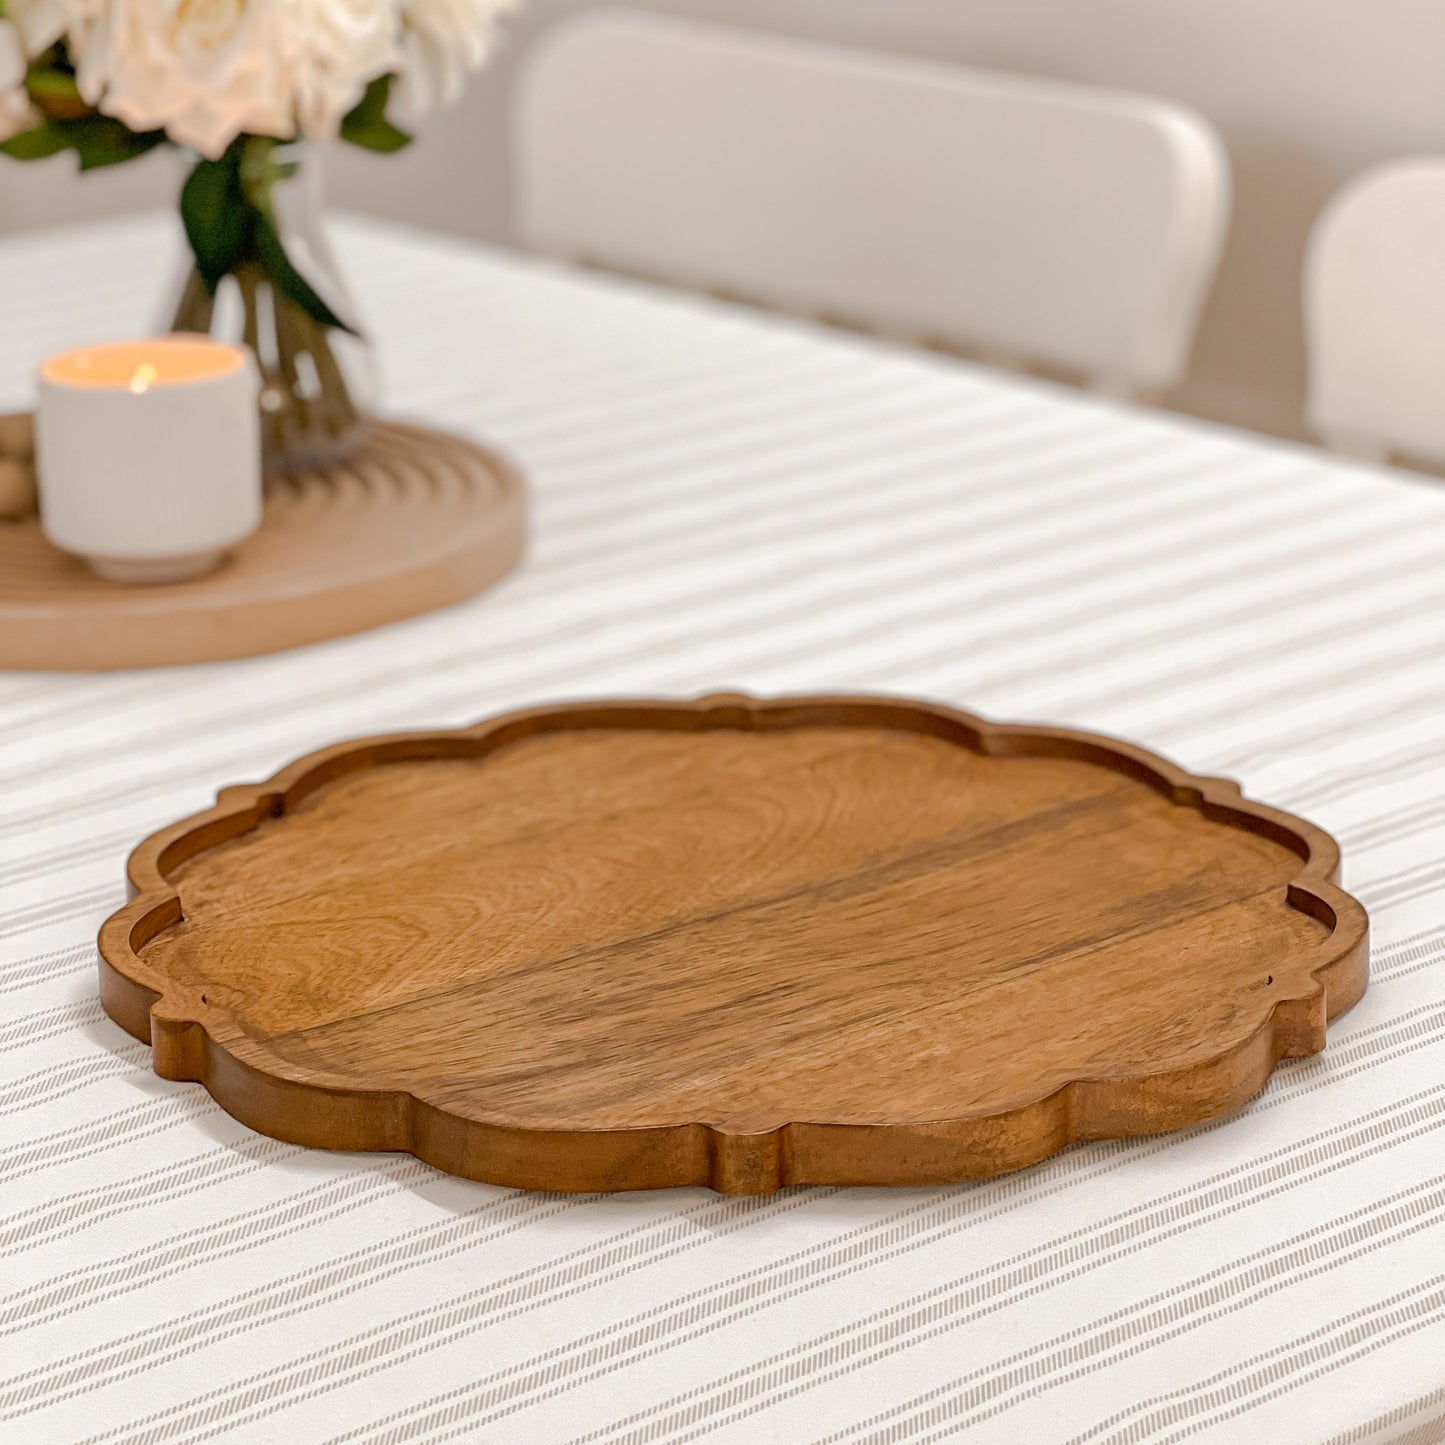 Wooden Tray for Serving - Lotus shape